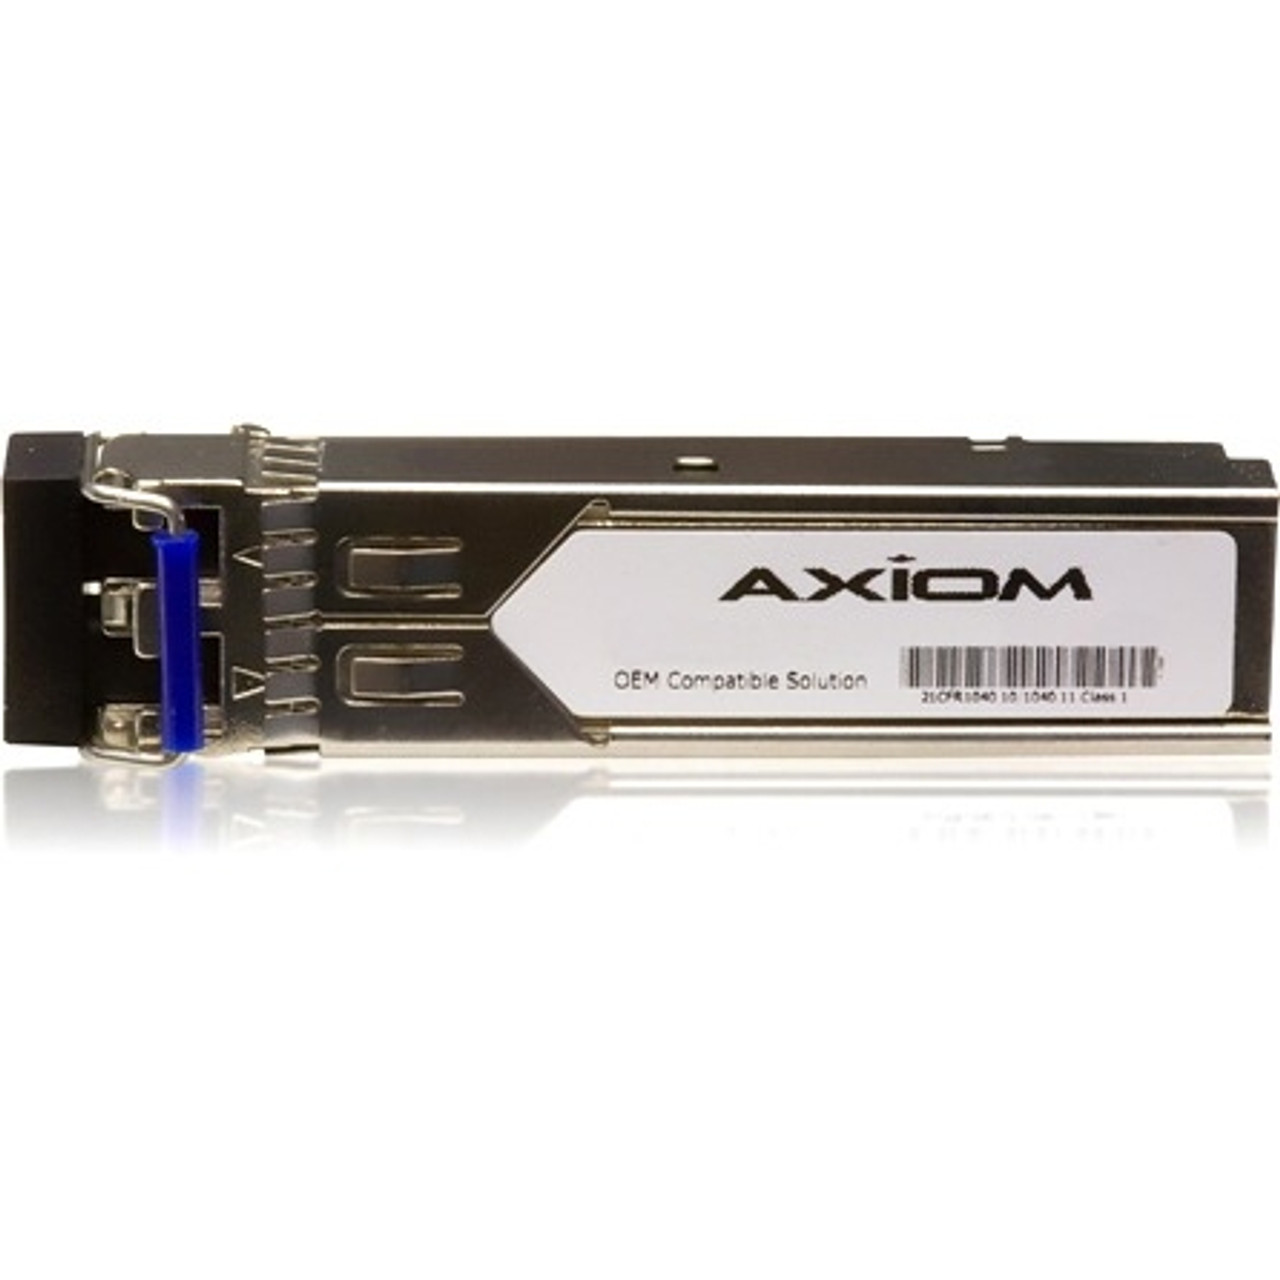 ITV2MLGNA100-AX Axiom 100Mbps 100Base-LX Single-mode Fiber 10km 1310nm LC Connector SFP (mini-GBIC) Transceiver Module for Mcafee Compatible